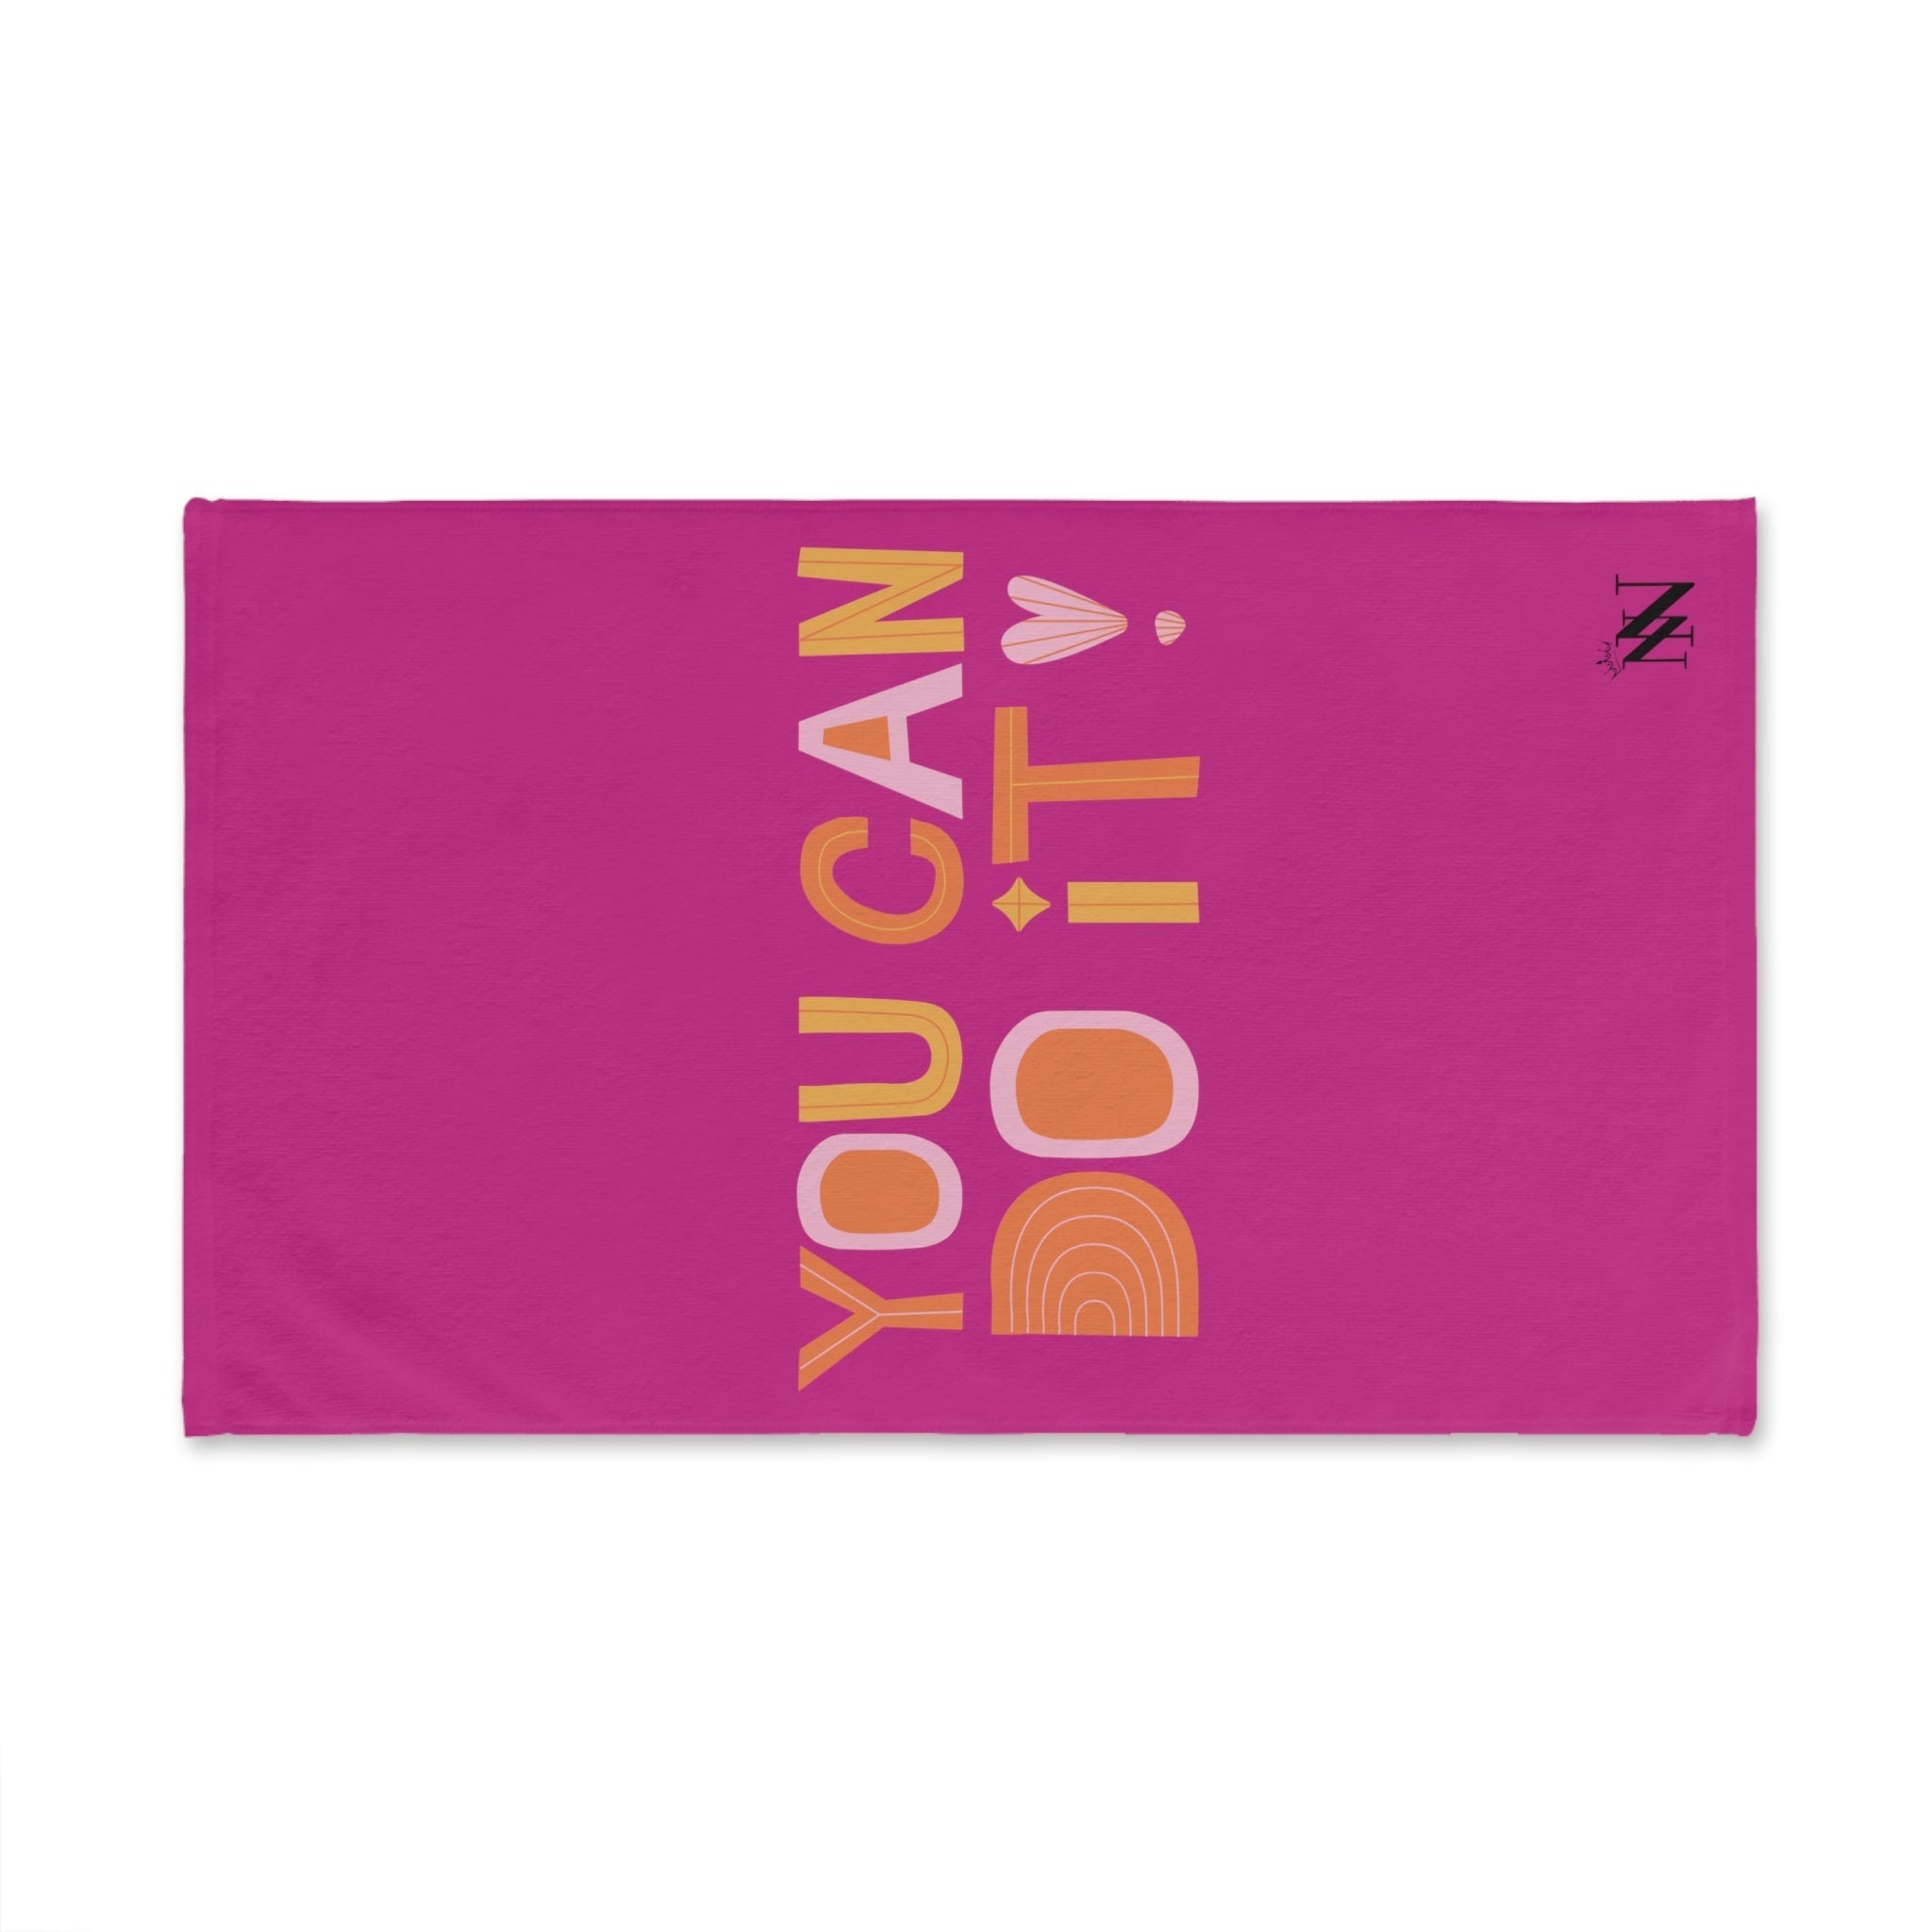 Boho Do It You Can Fuscia | Funny Gifts for Men - Gifts for Him - Birthday Gifts for Men, Him, Husband, Boyfriend, New Couple Gifts, Fathers & Valentines Day Gifts, Hand Towels NECTAR NAPKINS